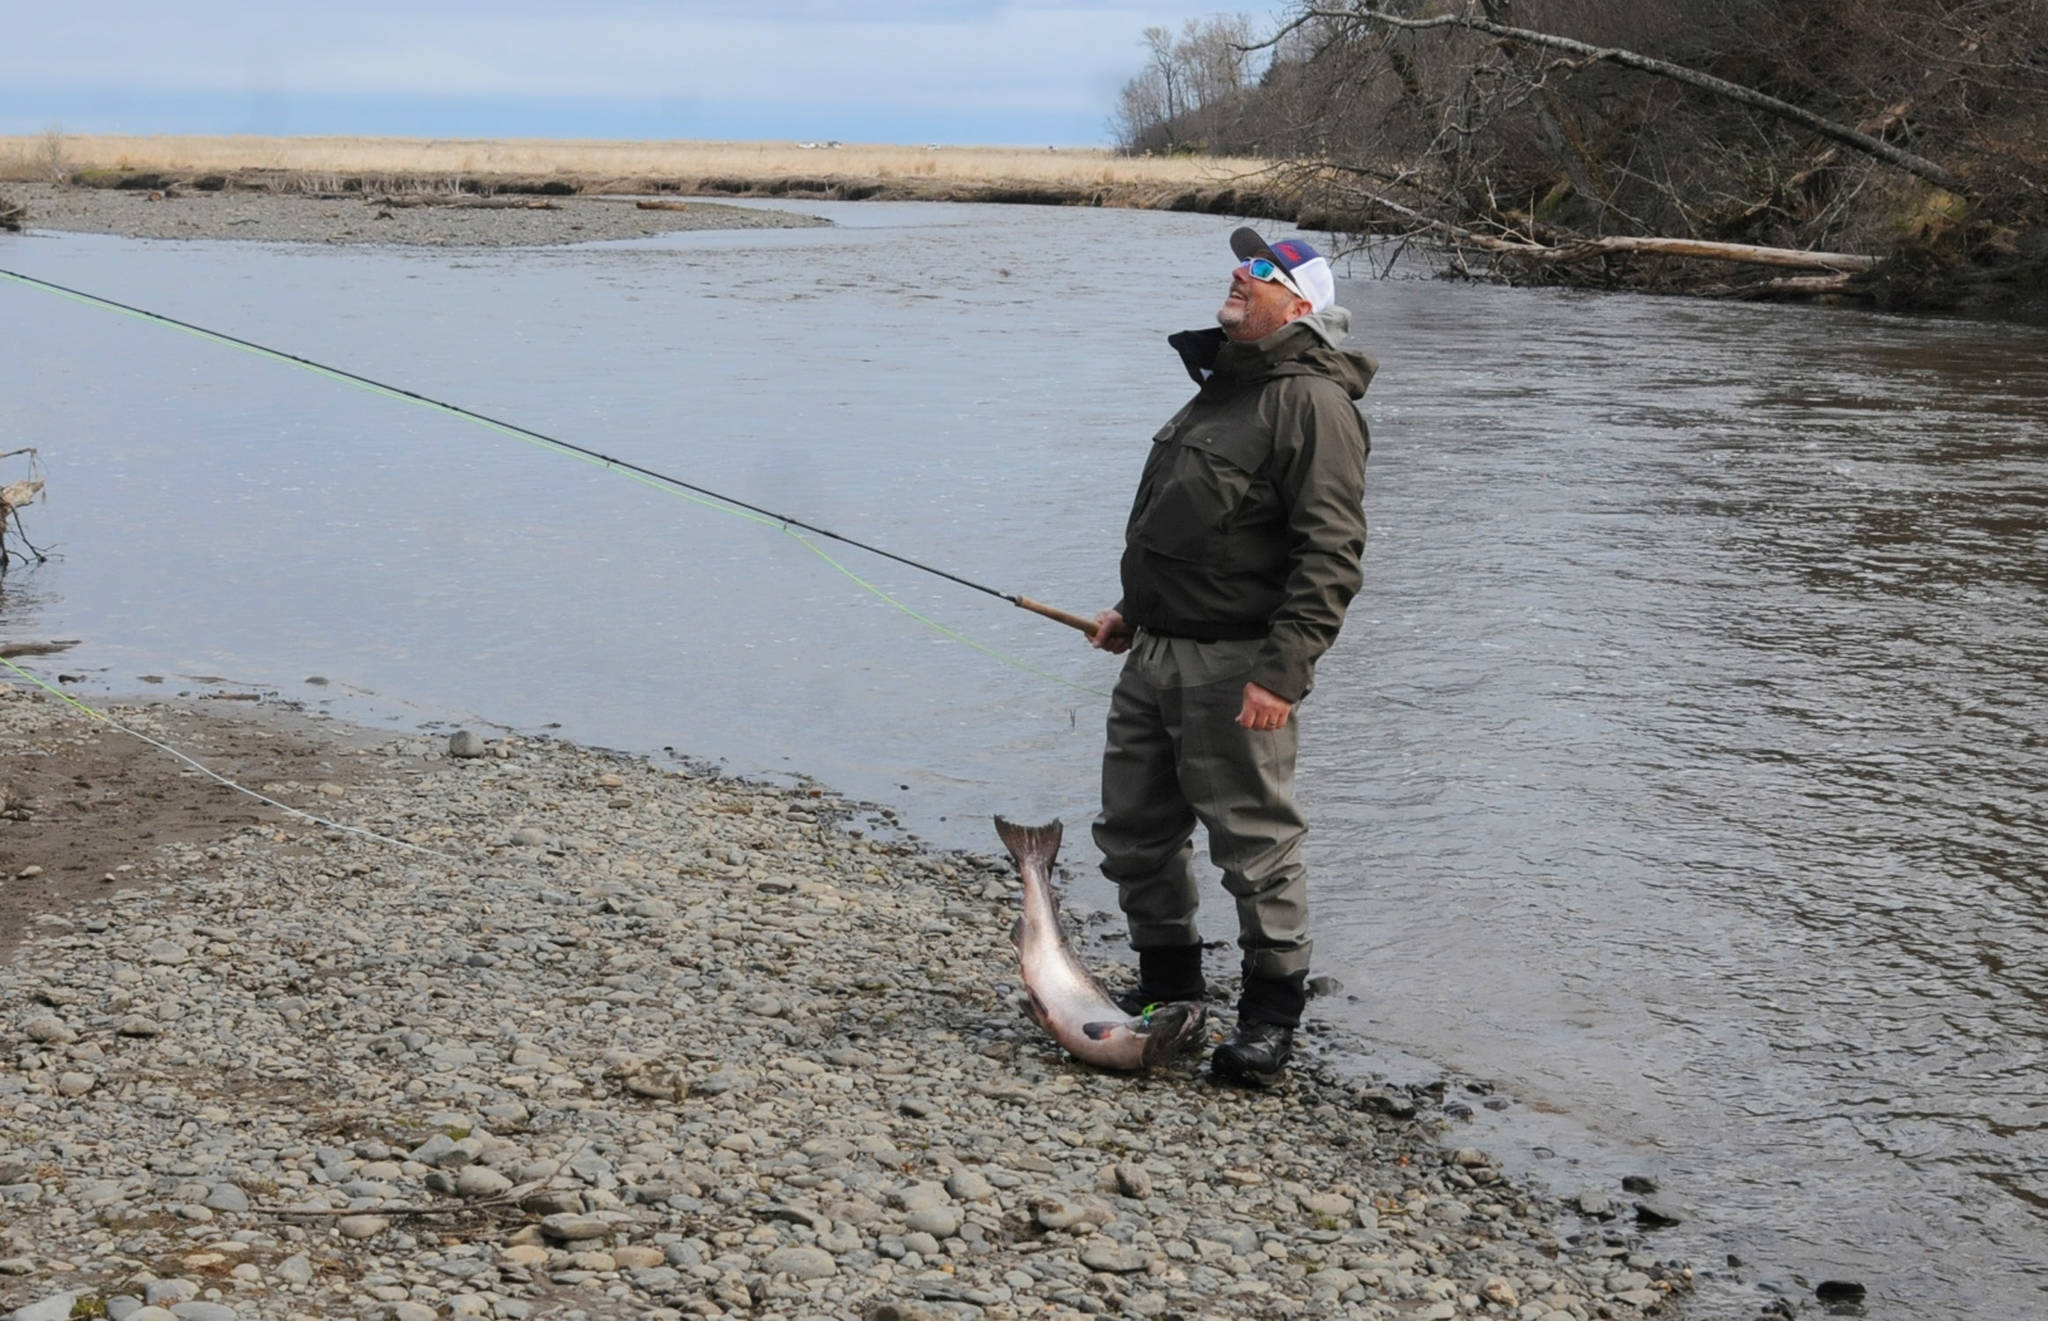 Terry Umatum of Anchorage takes a deep breath after landing his Anchor River king salmon on Saturday, May 19, 2018 in Anchor Point, Alaska. The Anchor River opening May 19 was the first chance for freshwater anglers on the Kenai Peninsula to catch king salmon. Saturday proved a slow morning for fishing — Umatum said he waited about 5 hours to catch his king — though it’s still early in the season. The Alaska Department of Fish and Game’s weir on the Anchor River has counted precisely zero kings so far this year, as of Saturday, though the weir is positioned several miles upriver from the mouth. (Photo by Elizabeth Earl/Peninsula Clarion)